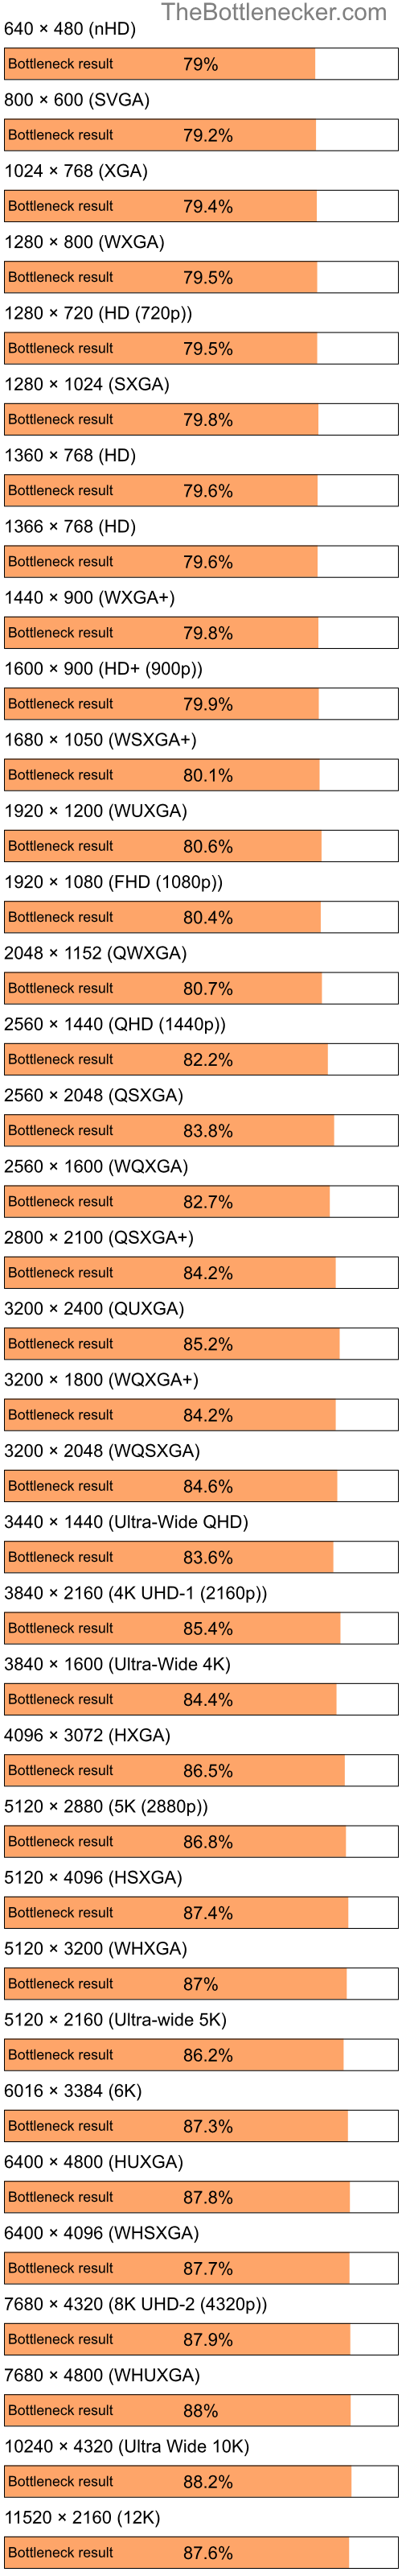 Bottleneck results by resolution for Intel Pentium 4 and AMD Radeon X1550 64-bit in Graphic Card Intense Tasks